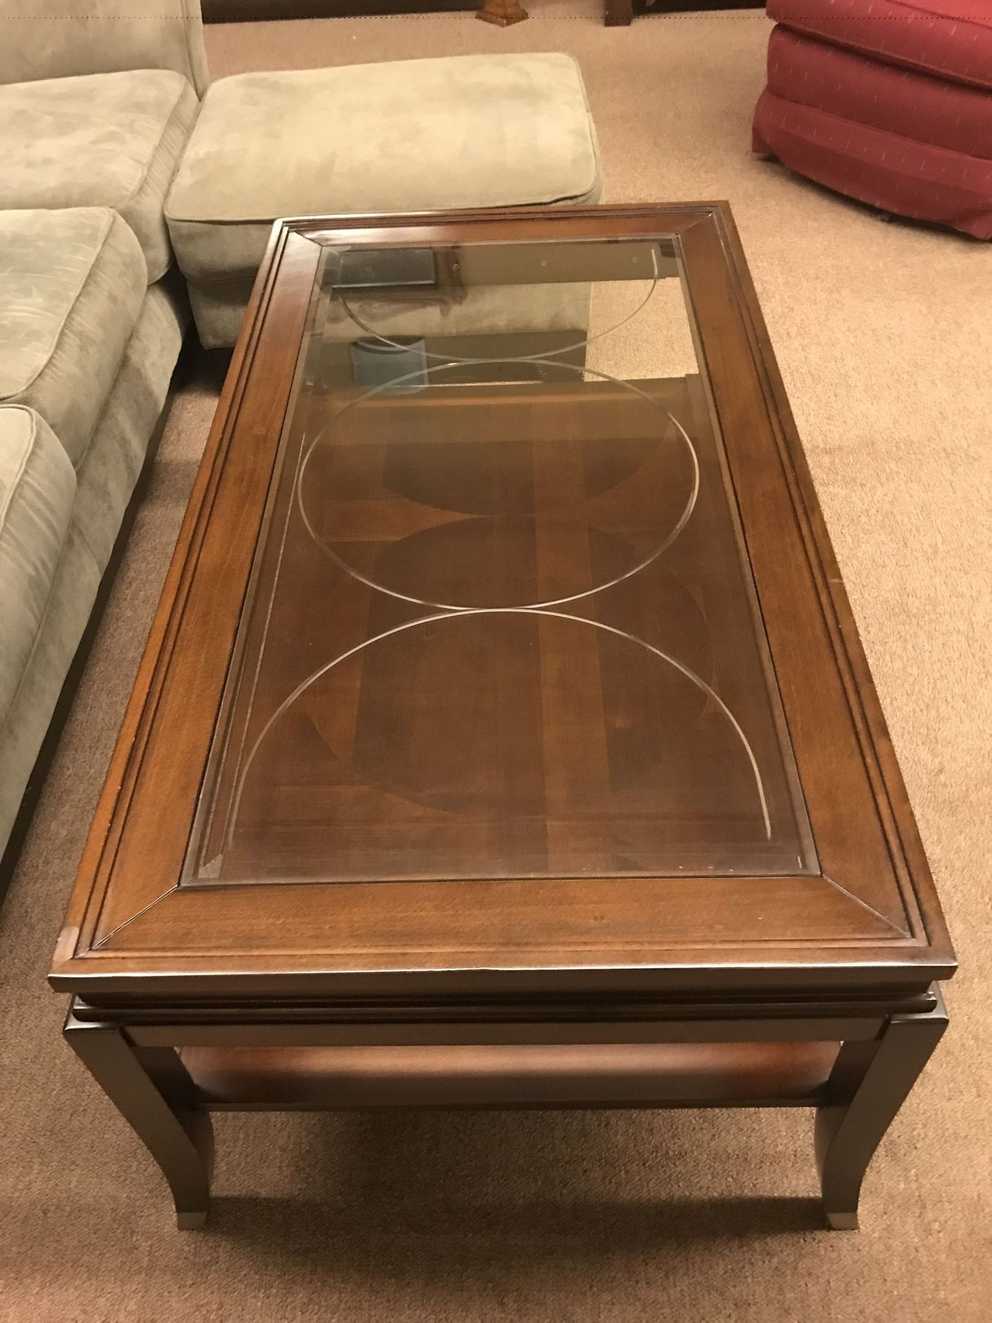 Newest Etched Glass Coffee Table (Gallery 4 of 10)